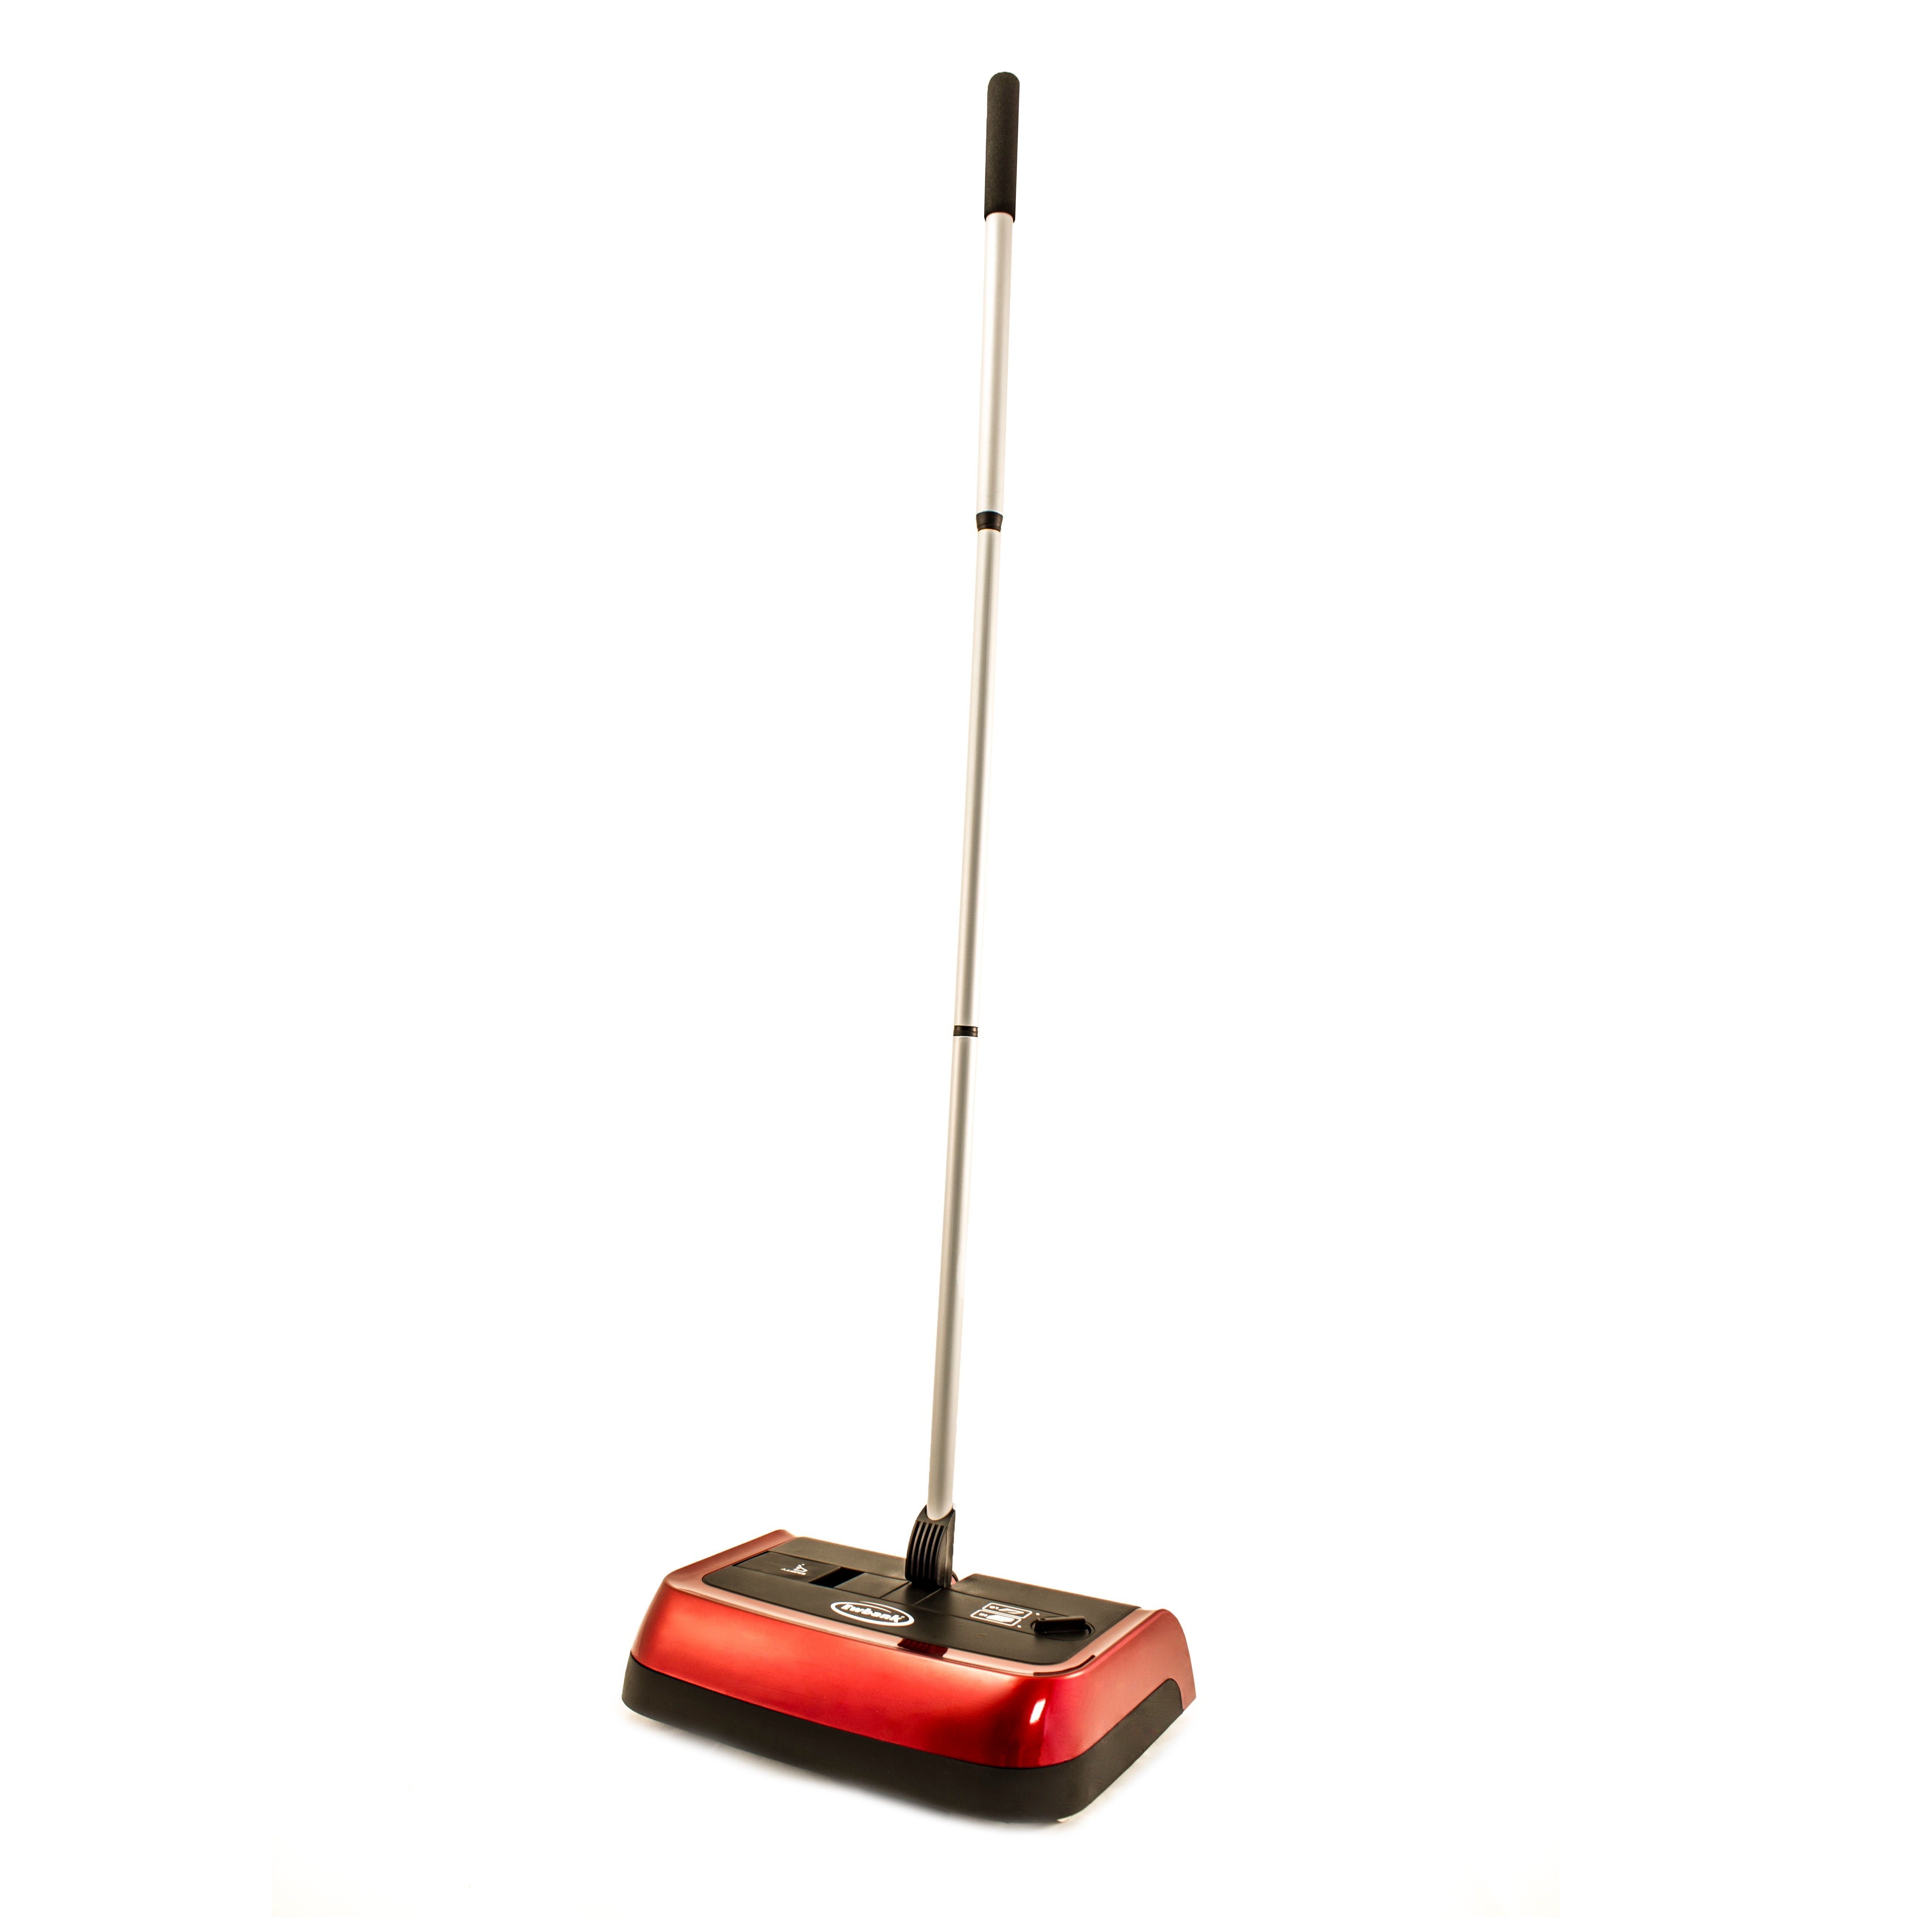 Picture of Ewbank 830 Evolution 3 Manual Carpet Sweeper